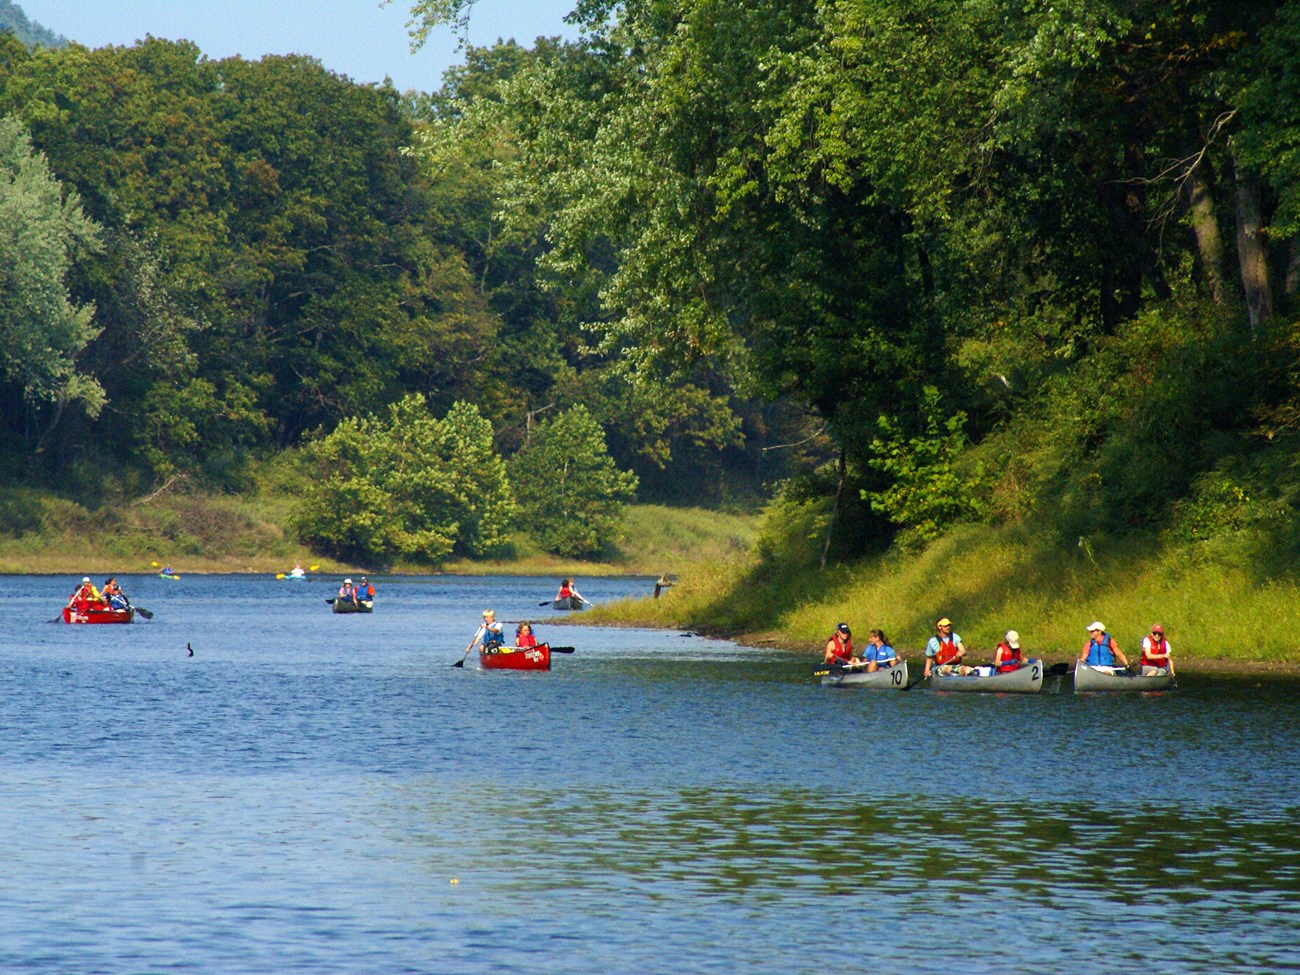 A group of people in brightly colored canoes paddle down the calm waters of the Delaware River